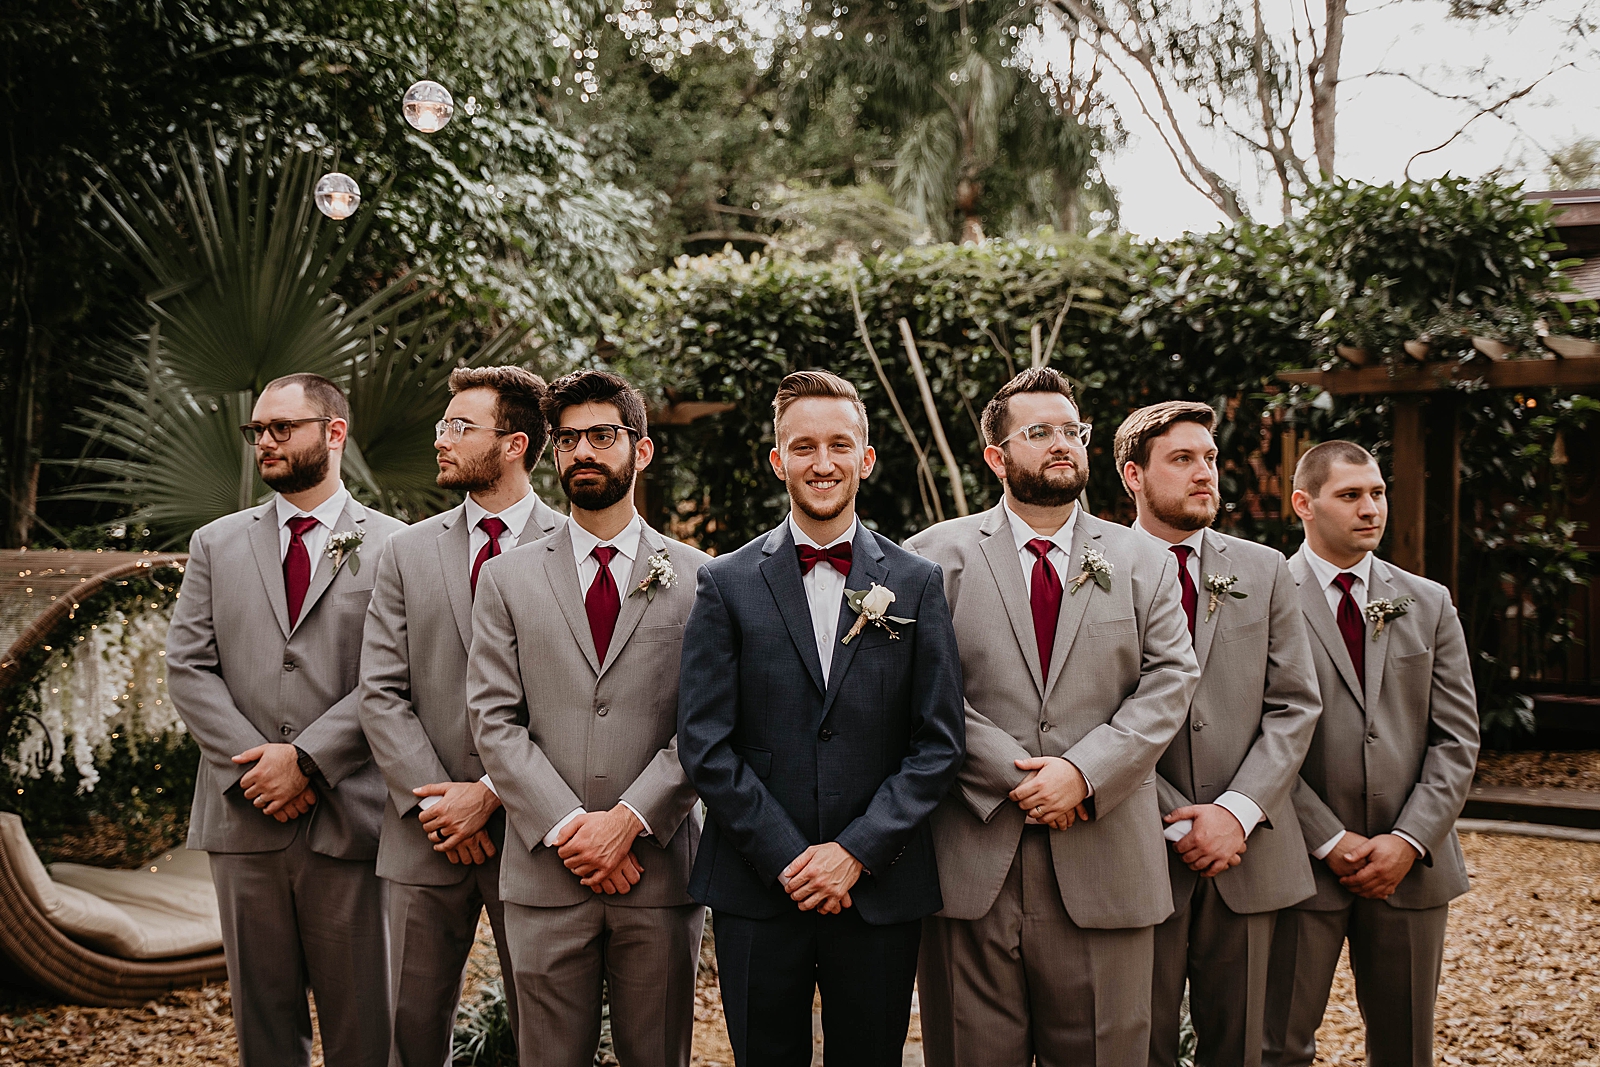 Groom standing in formation with Groomsmen in greenery Living Sculptures Sanctuary Wedding Photography captured by South Florida Wedding Photographer Krystal Capone Photography 